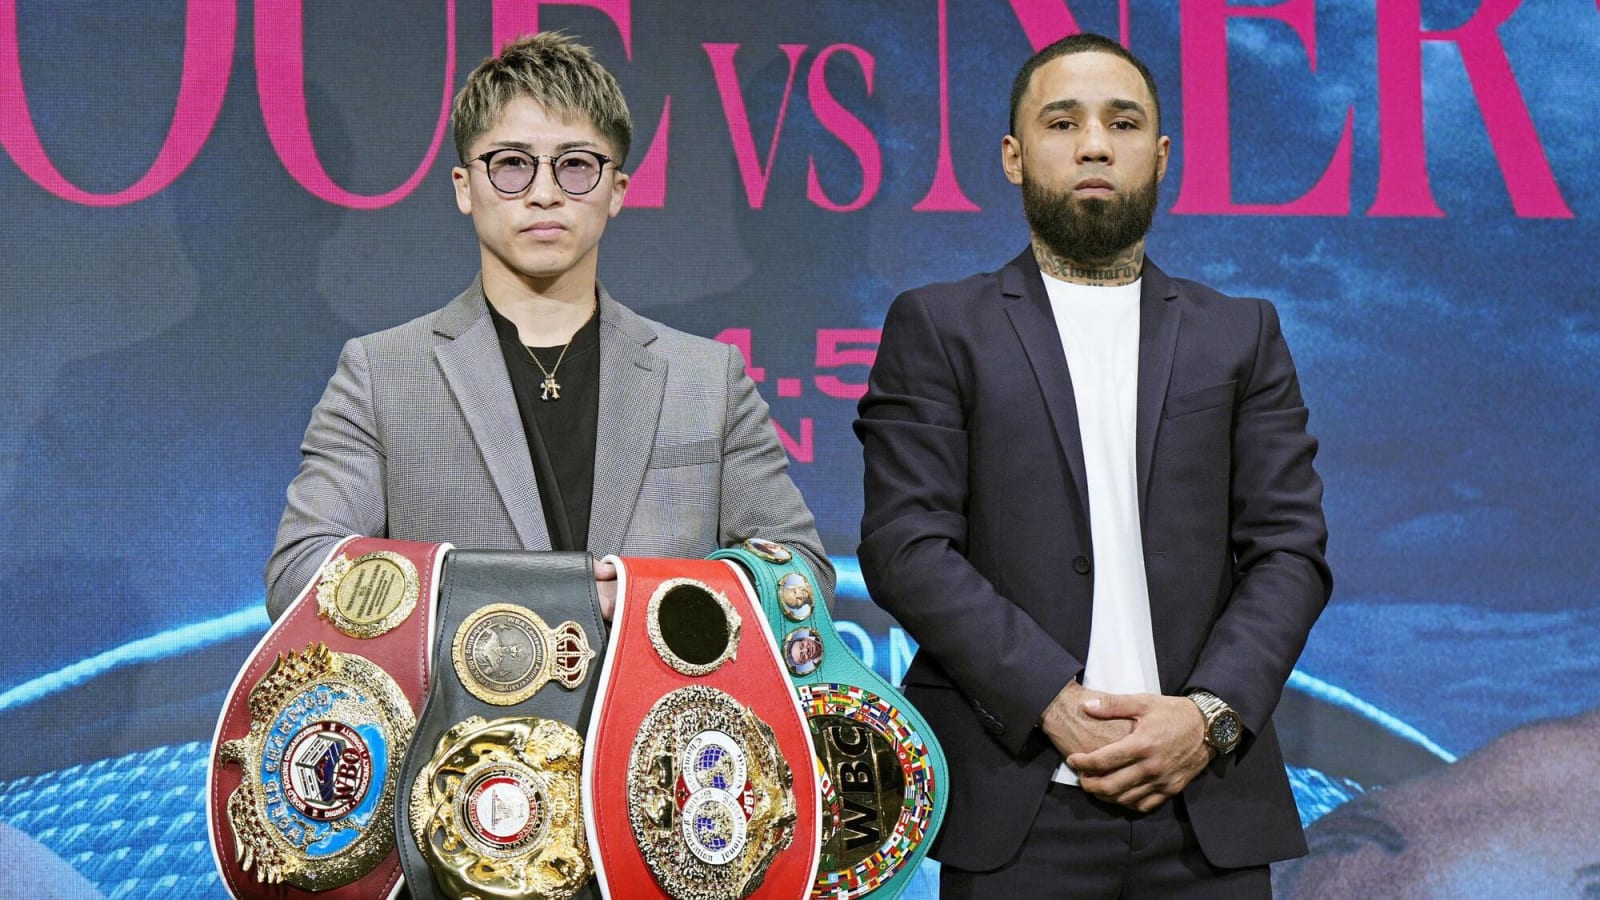 Naoya Inoue vs. Luis Nery: A Breakdown of the Fight by Numbers